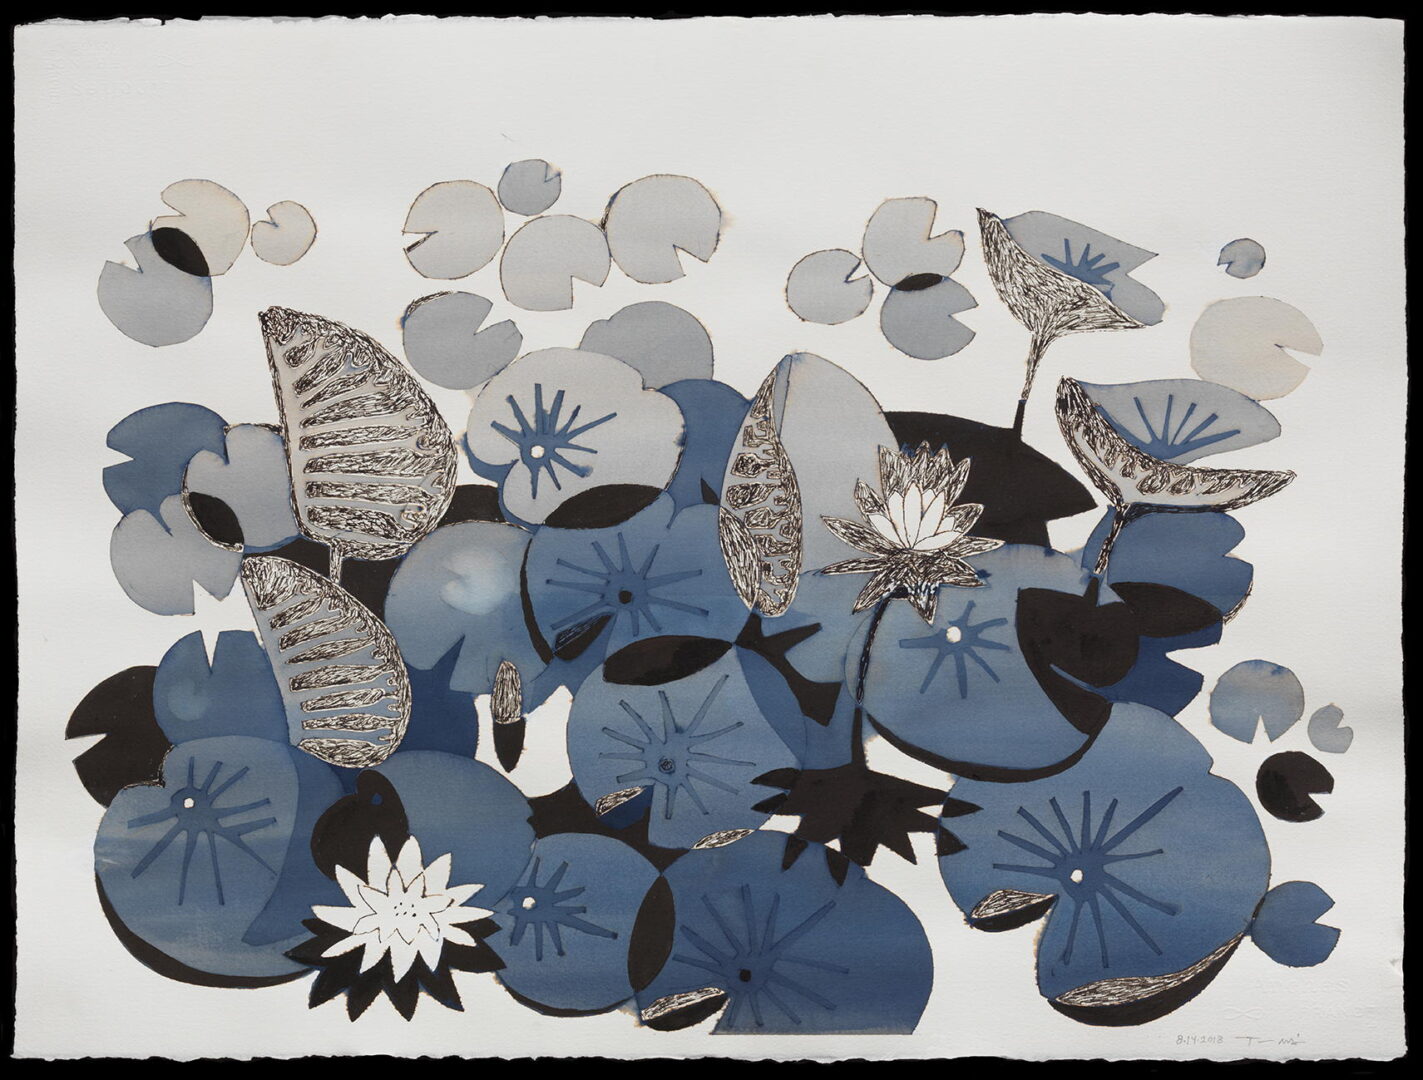 A painting of water lilies and leaves on paper.